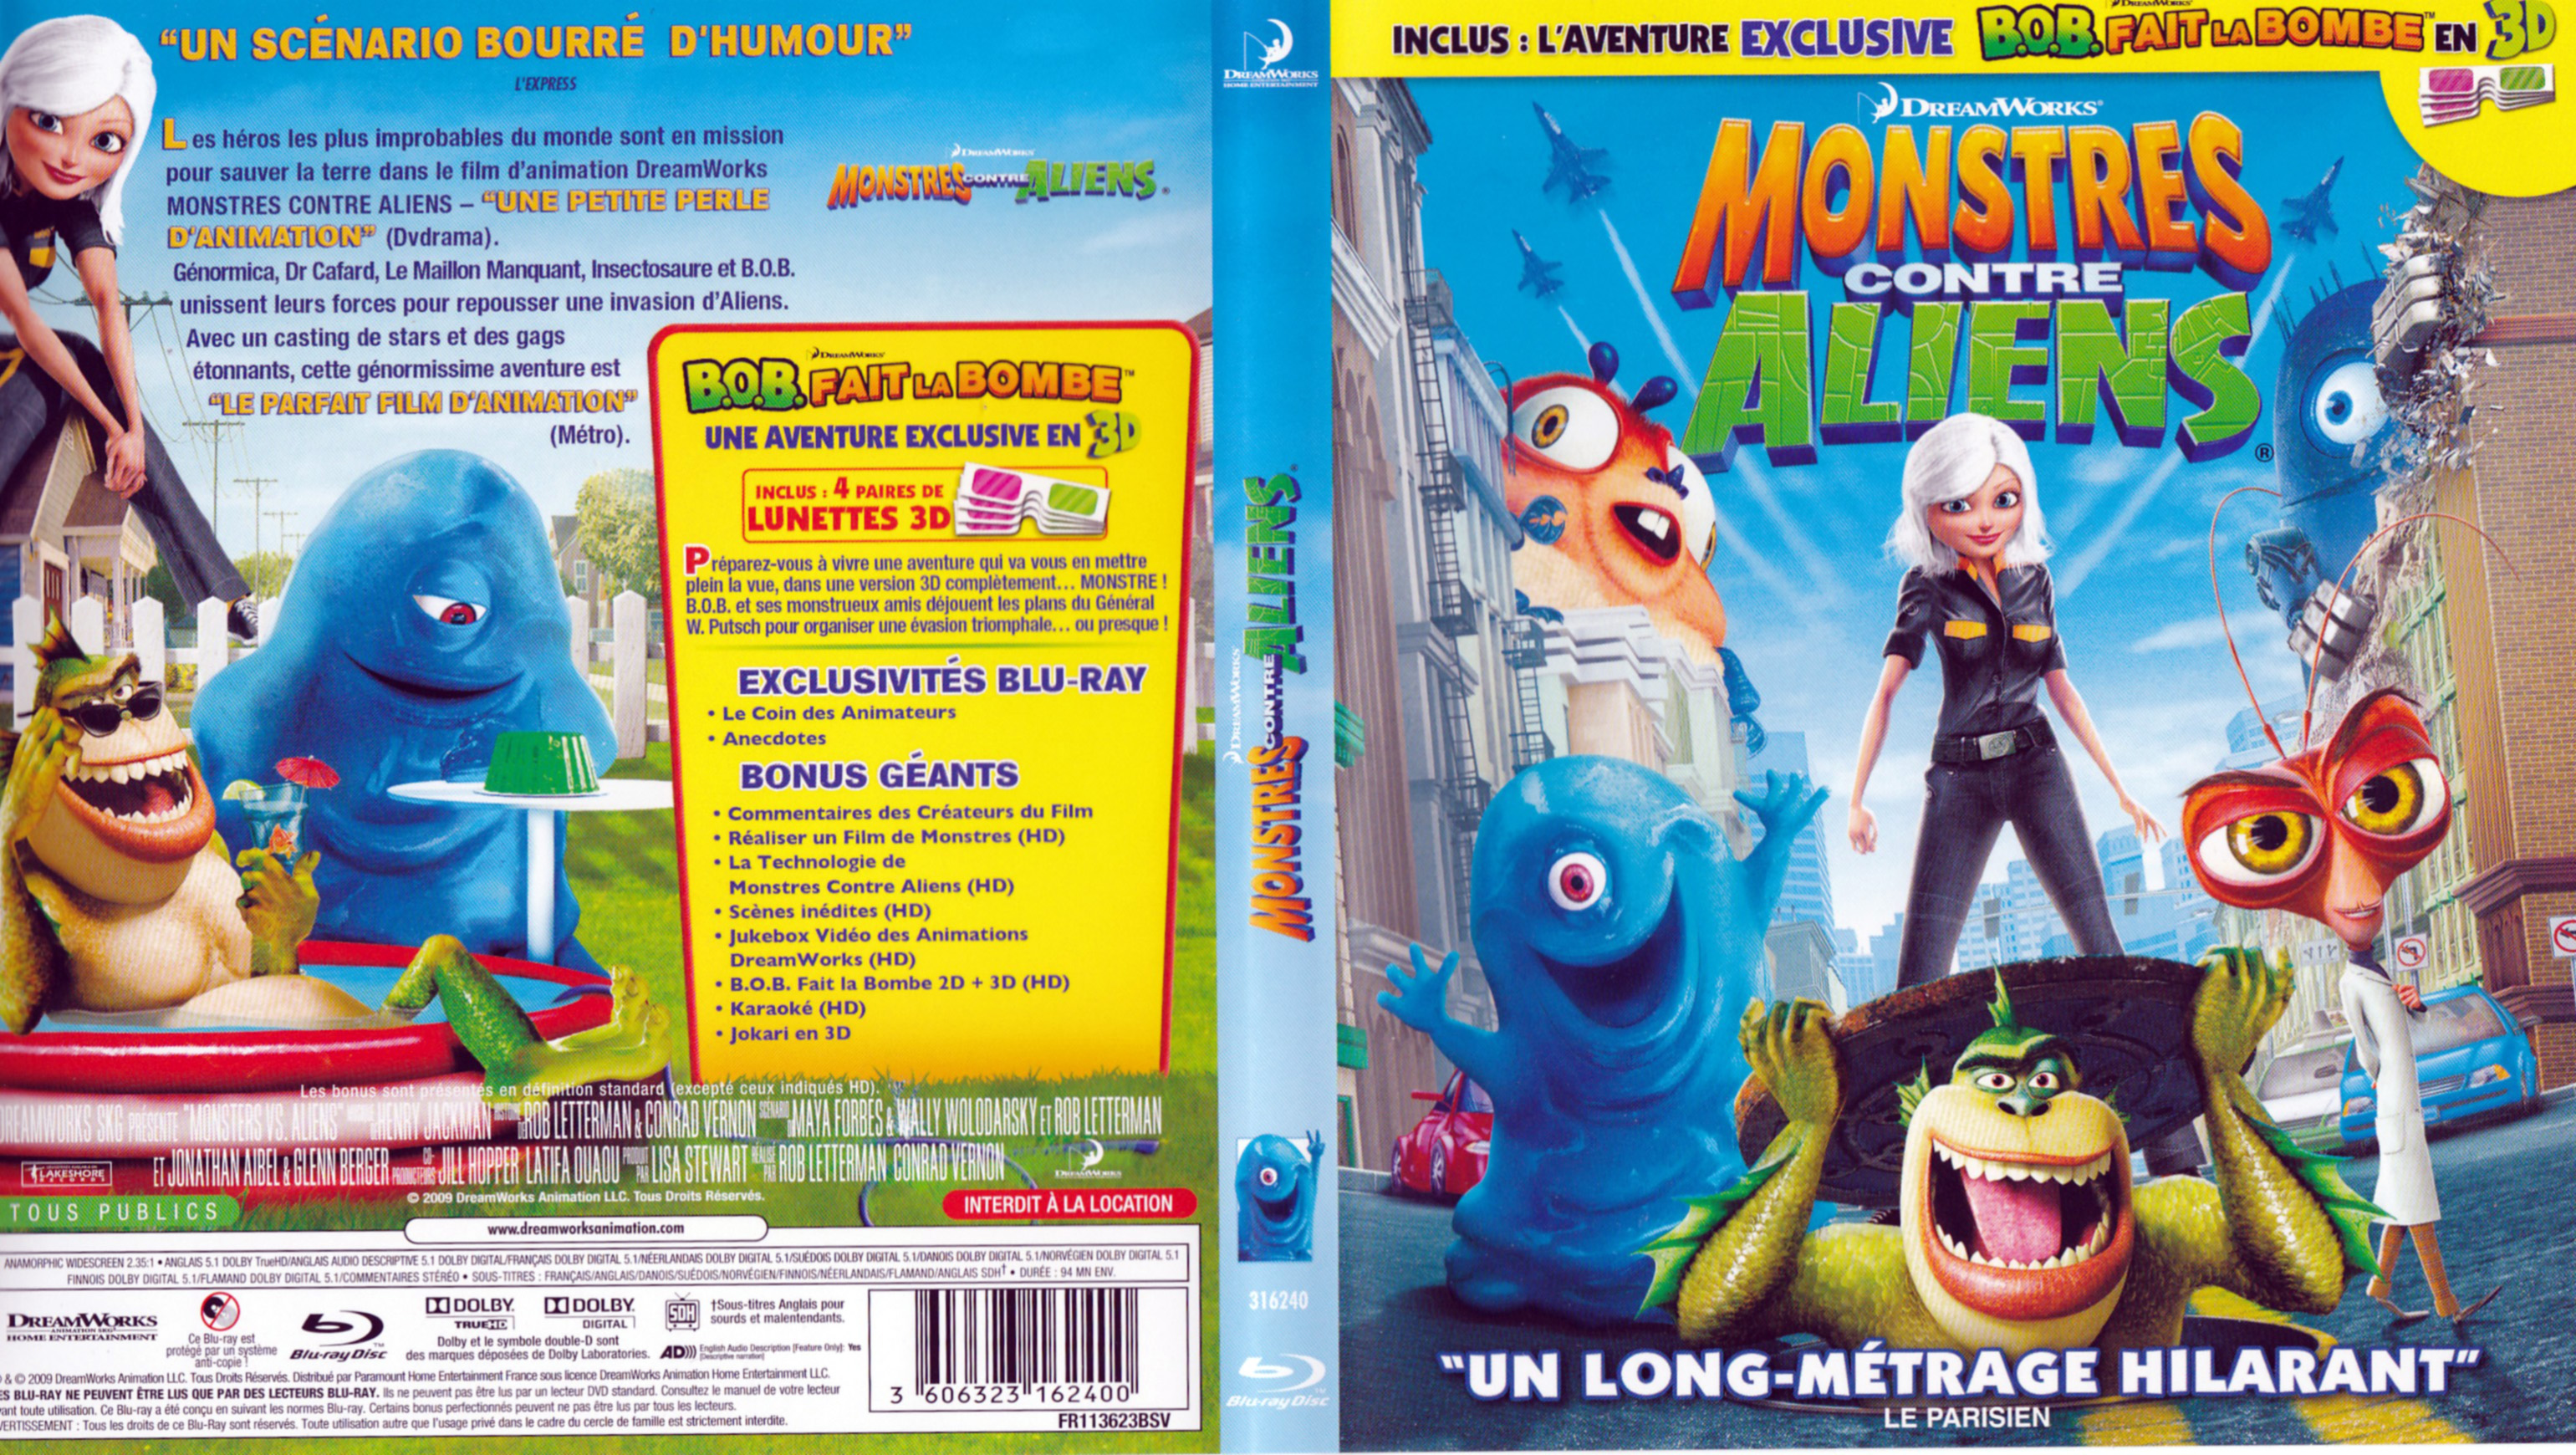 Jaquette DVD Monstres contre aliens (BLU-RAY)